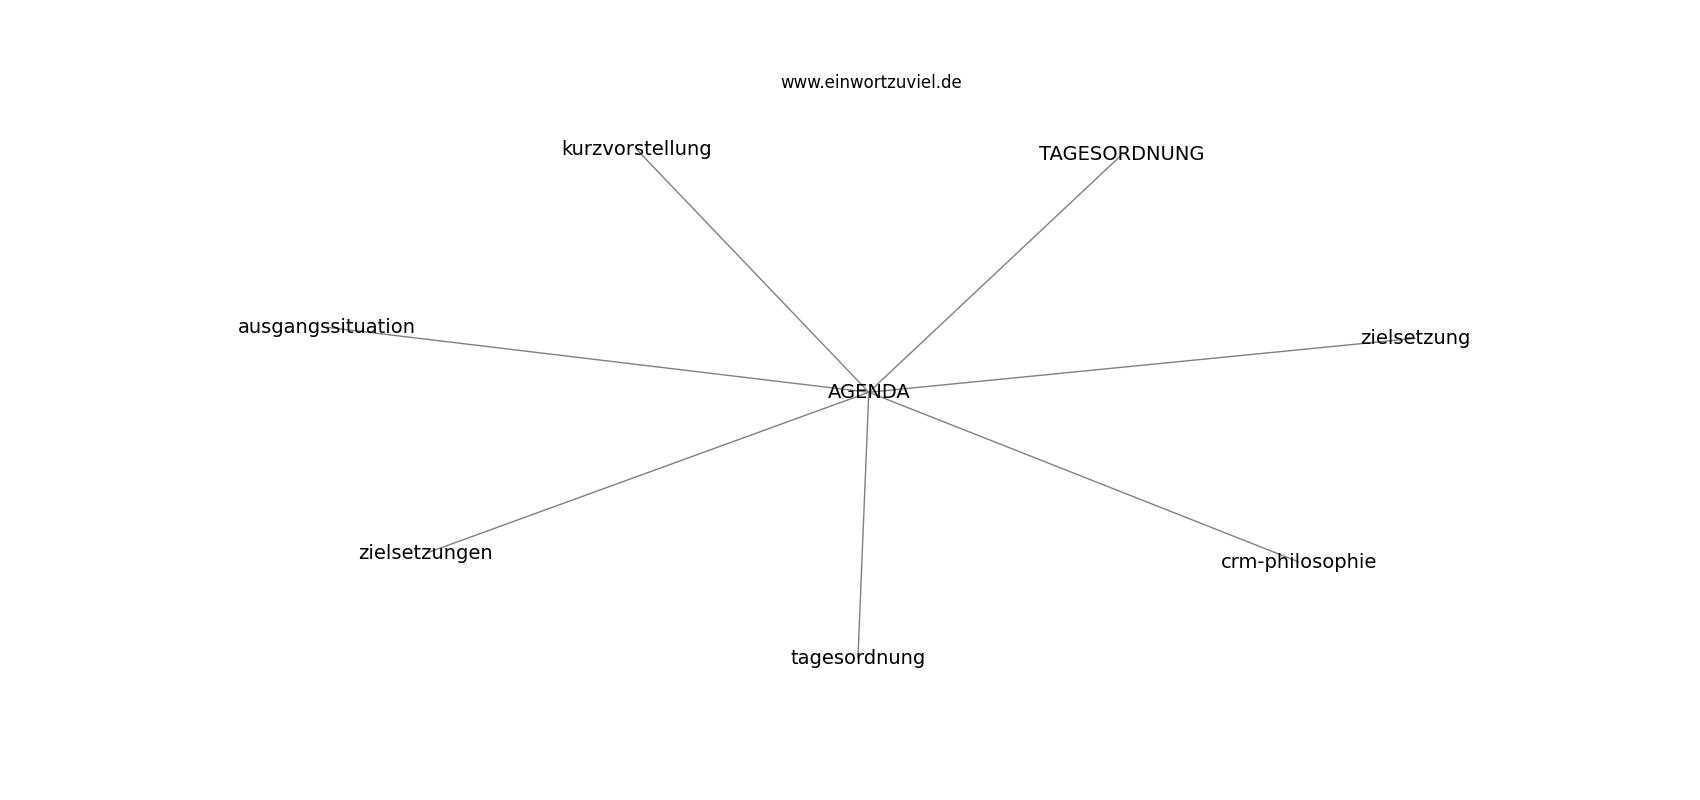 Graphique Champ lexical tagesordnung